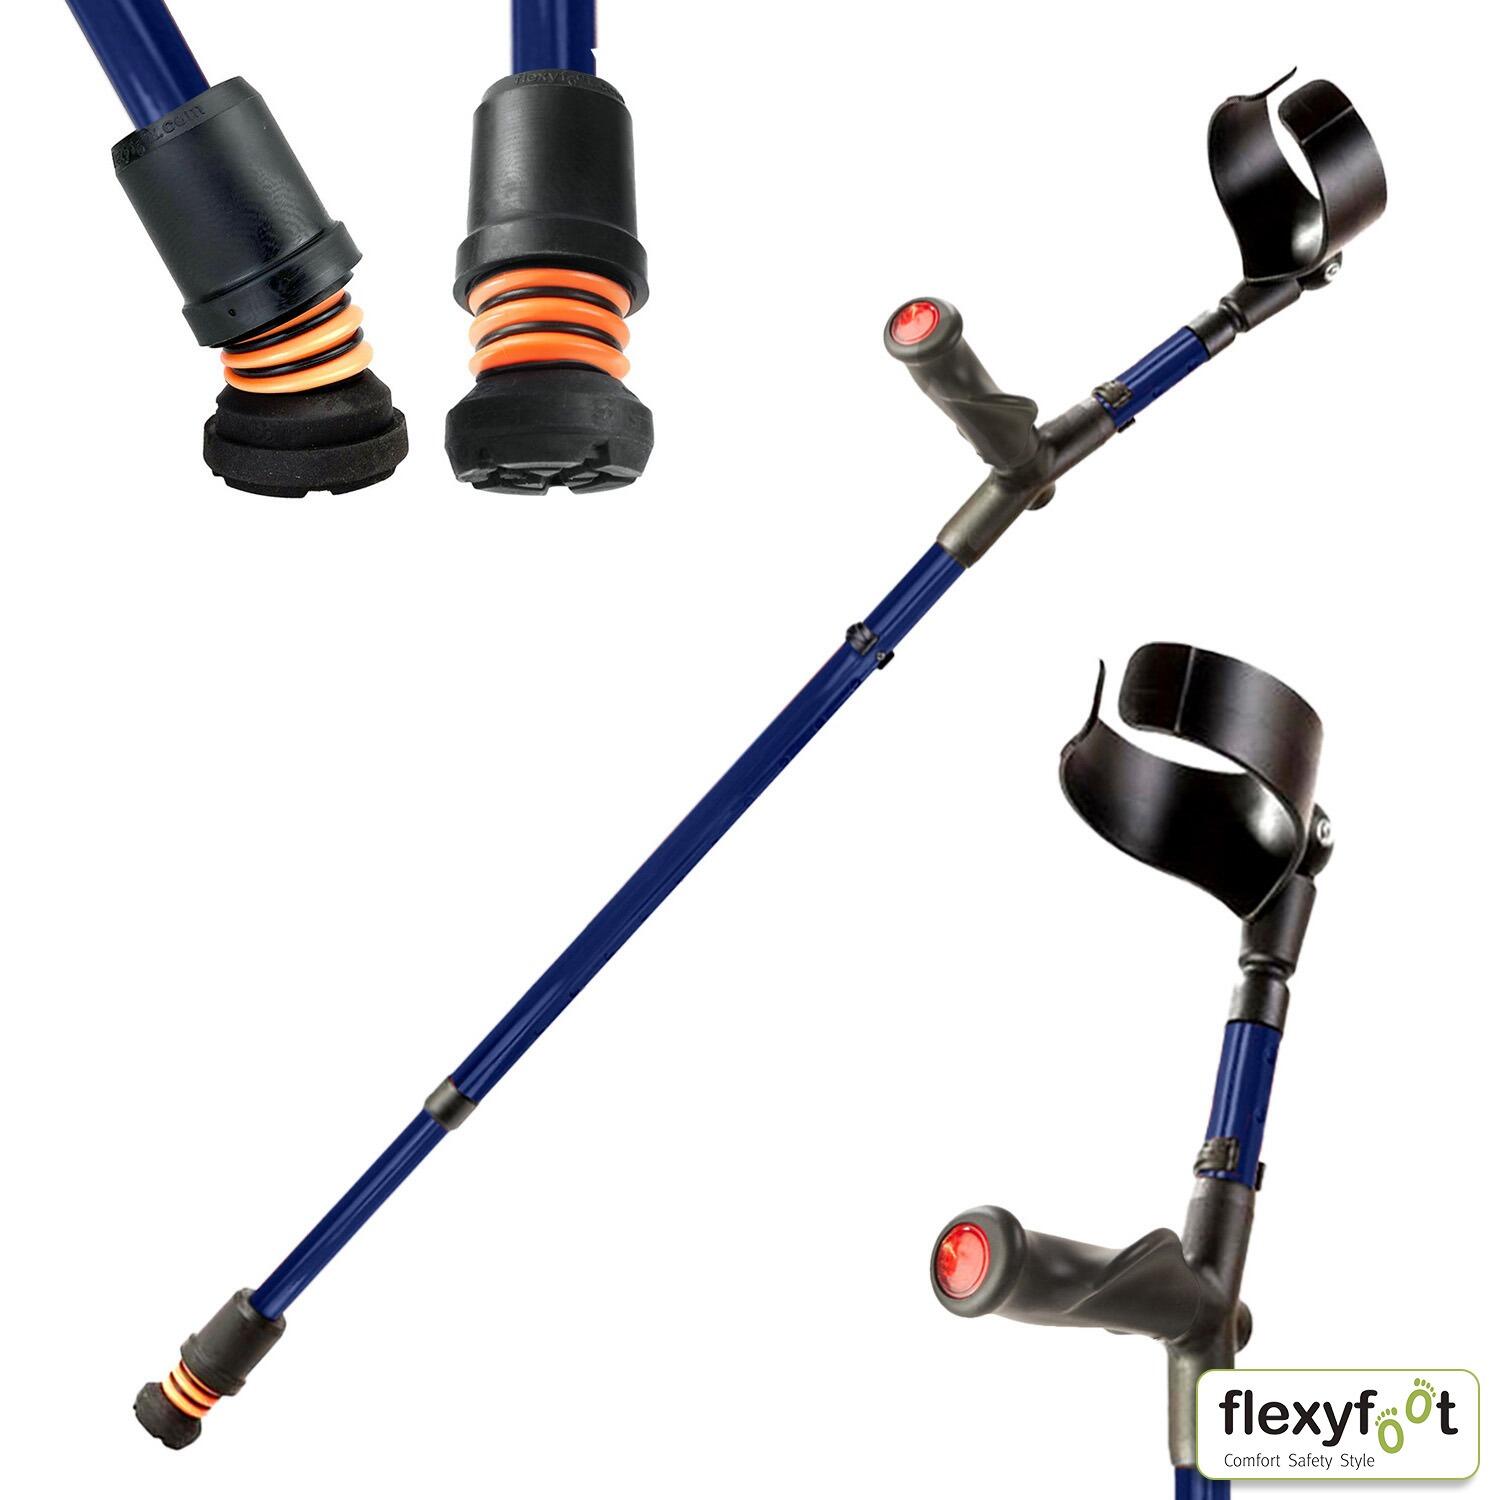 A single Right blue Flexyfoot Comfort Grip Double Adjustable Crutch